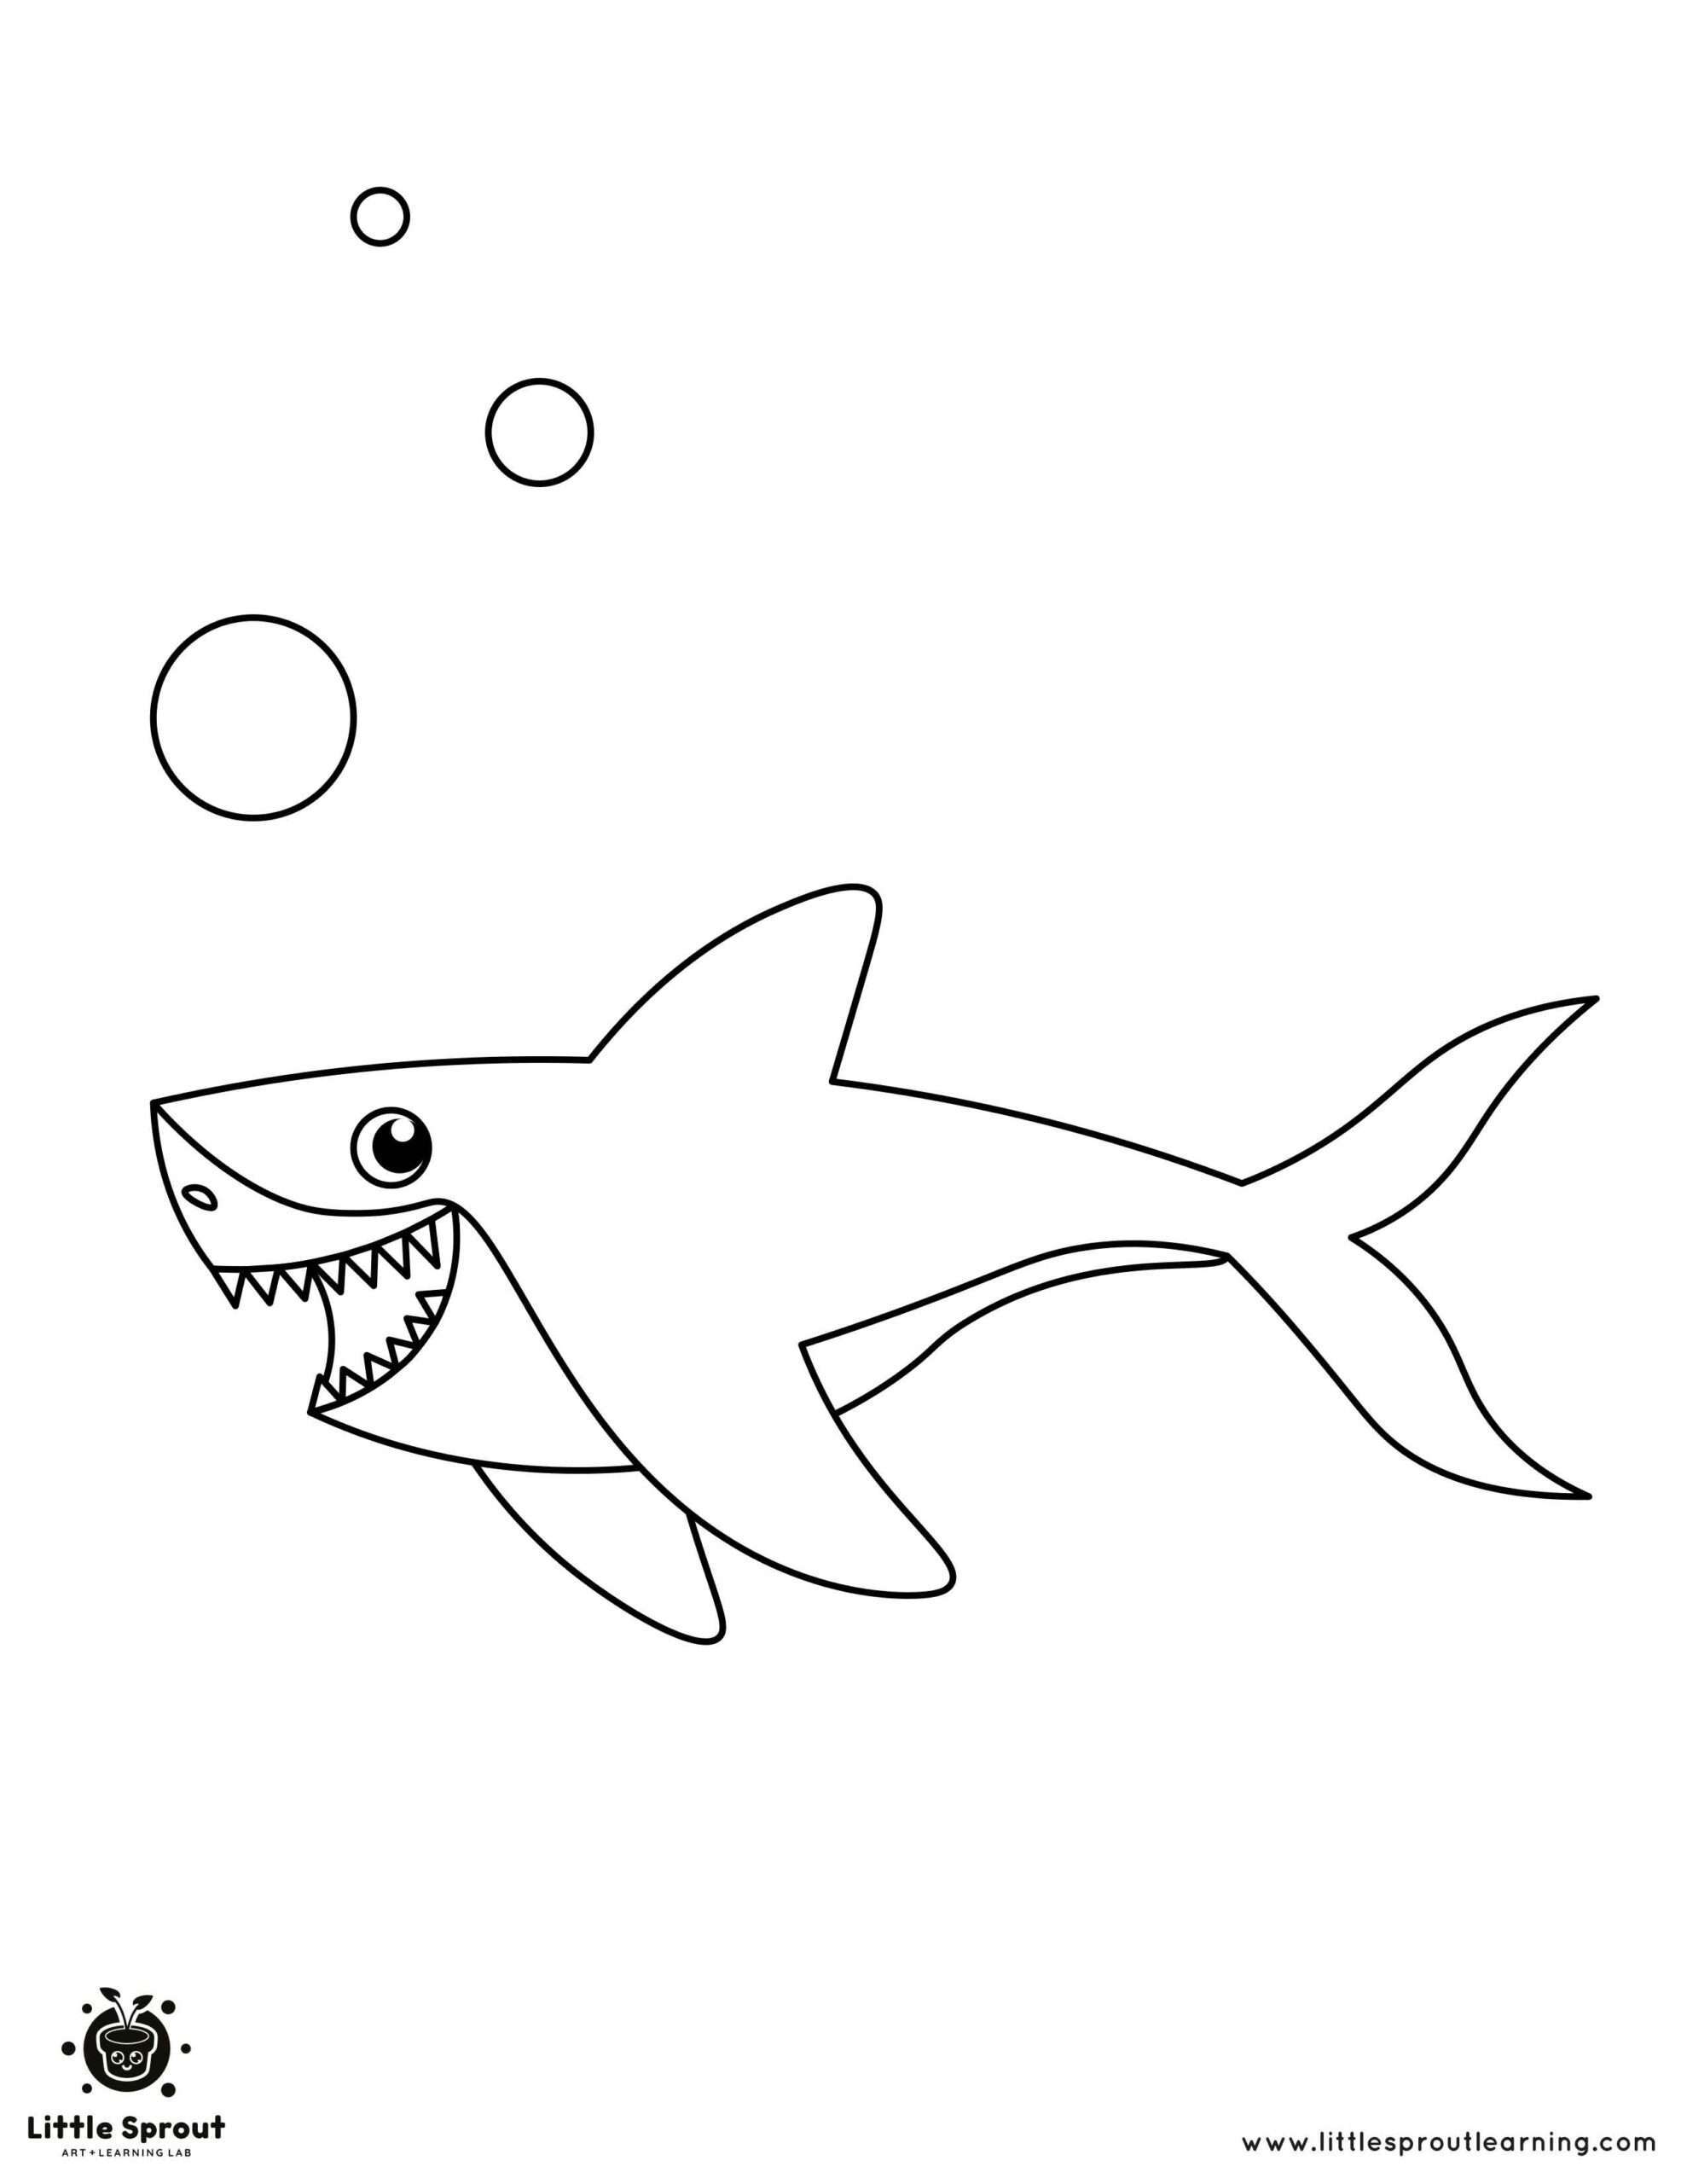 Coloring Page Sharks 1 Little Sprout Learning scaled